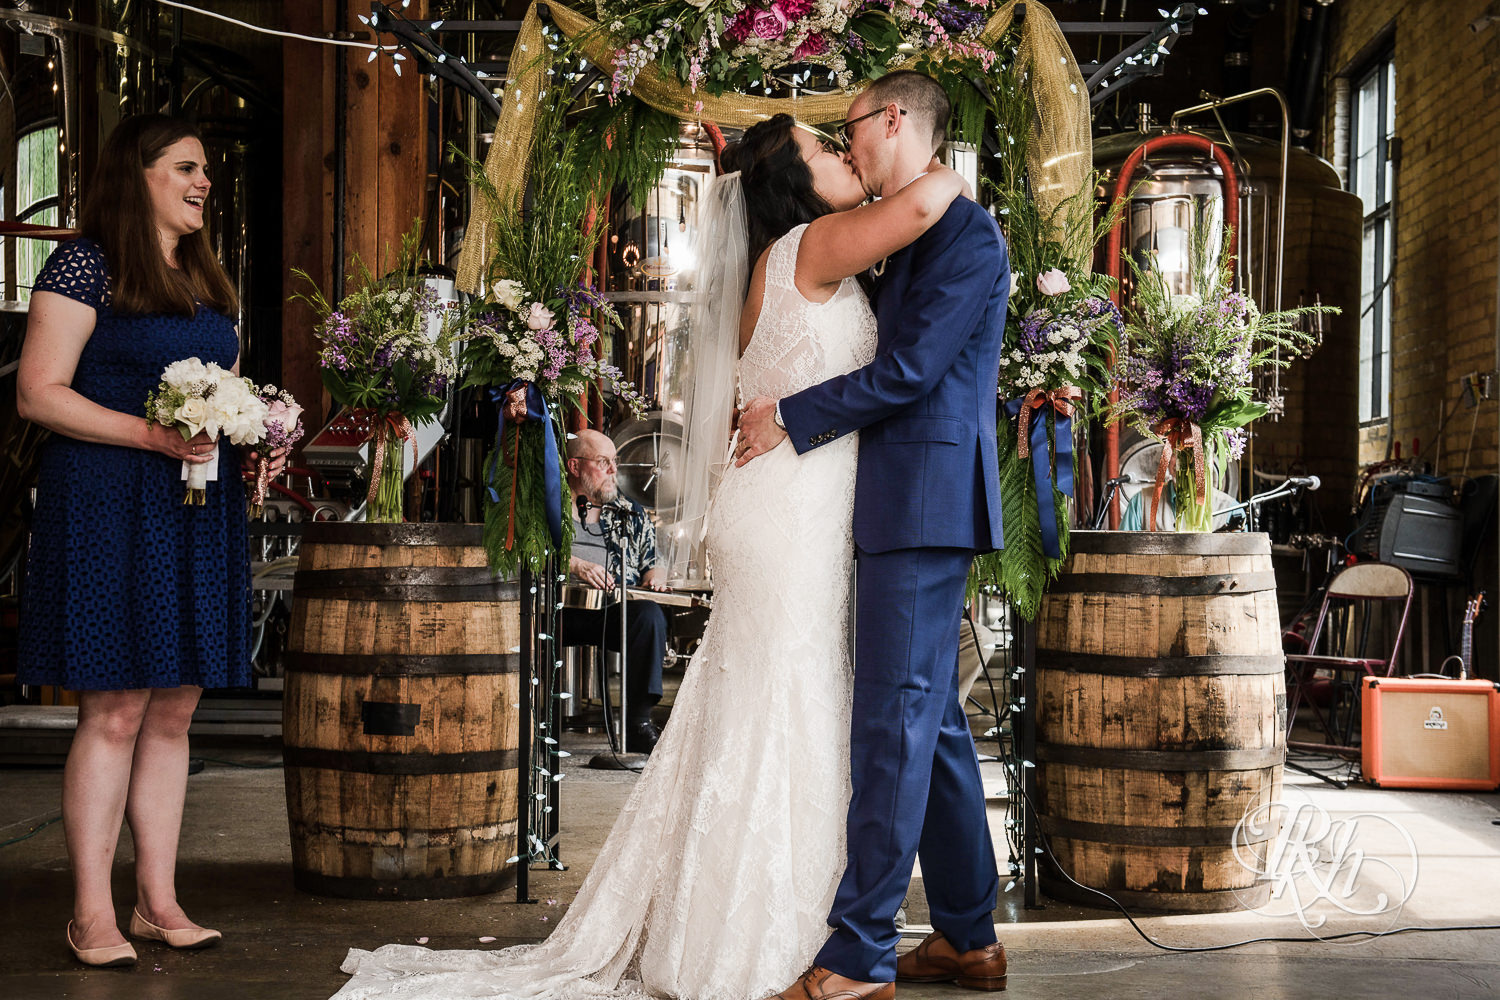 Asian bride with glasses and groom kiss during wedding ceremony at 612 Brew in Minneapolis, Minnesota.